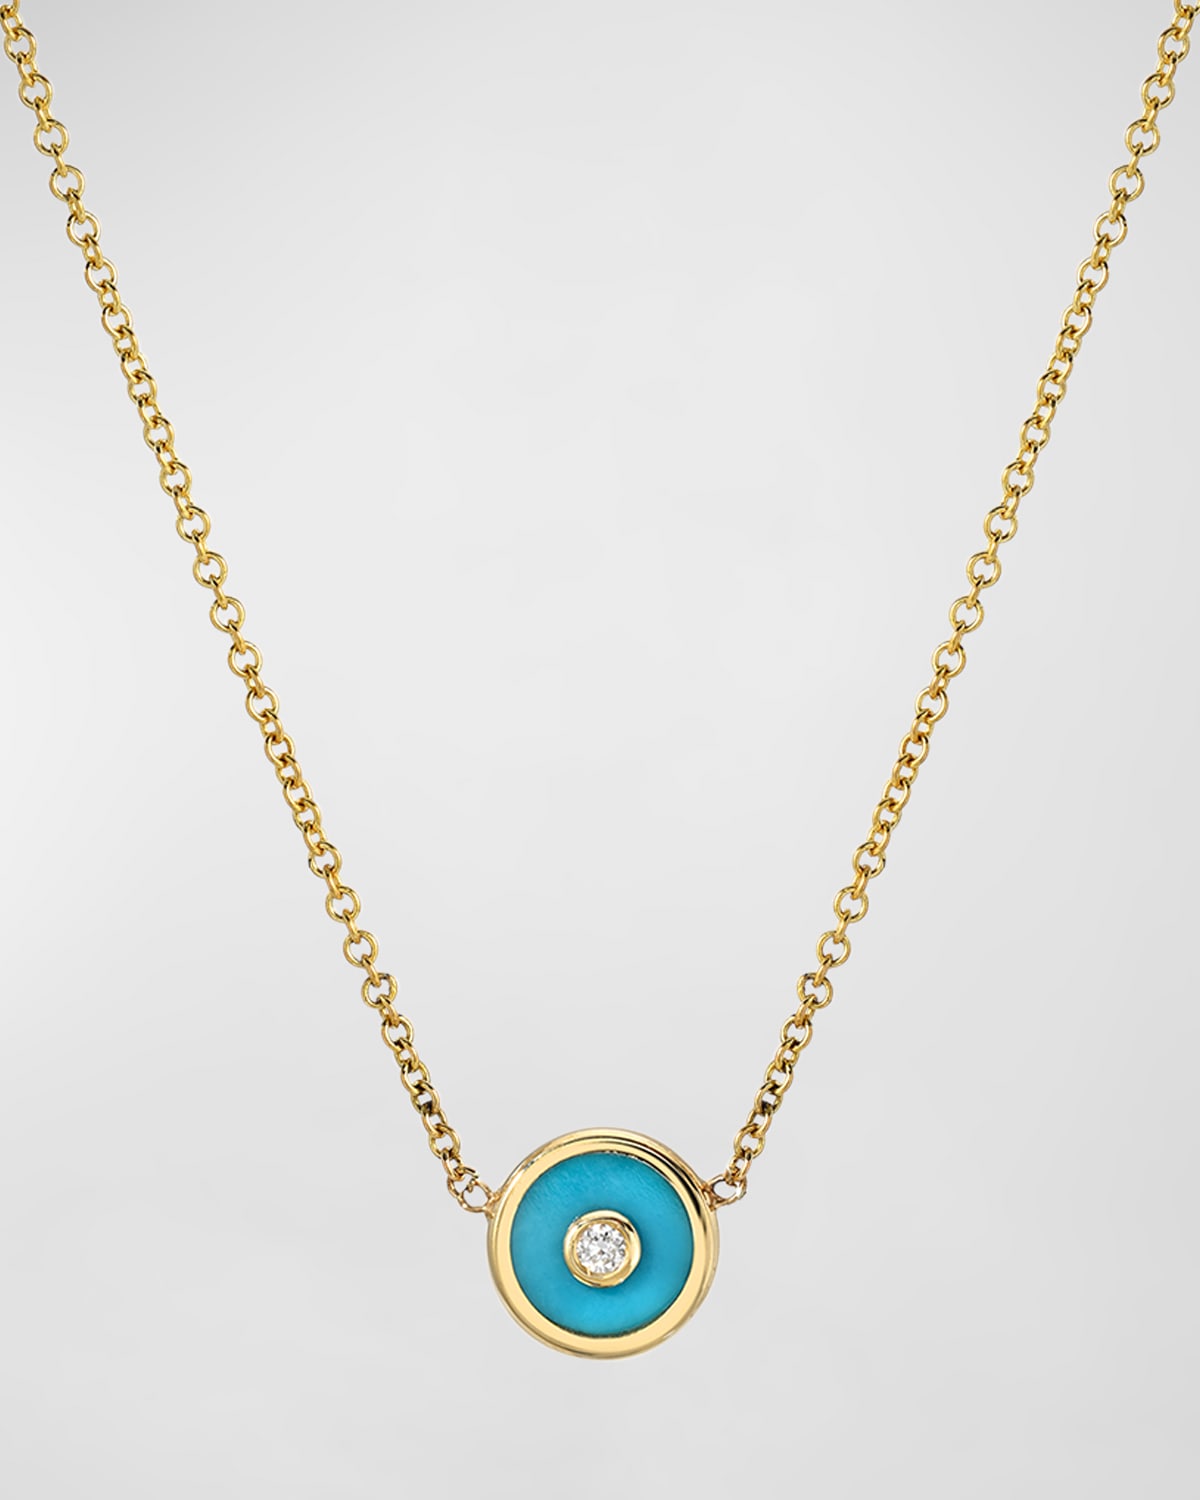 Retrouvai Mini Compass Turquoise Pendant Necklace With Diamond Center In Gold